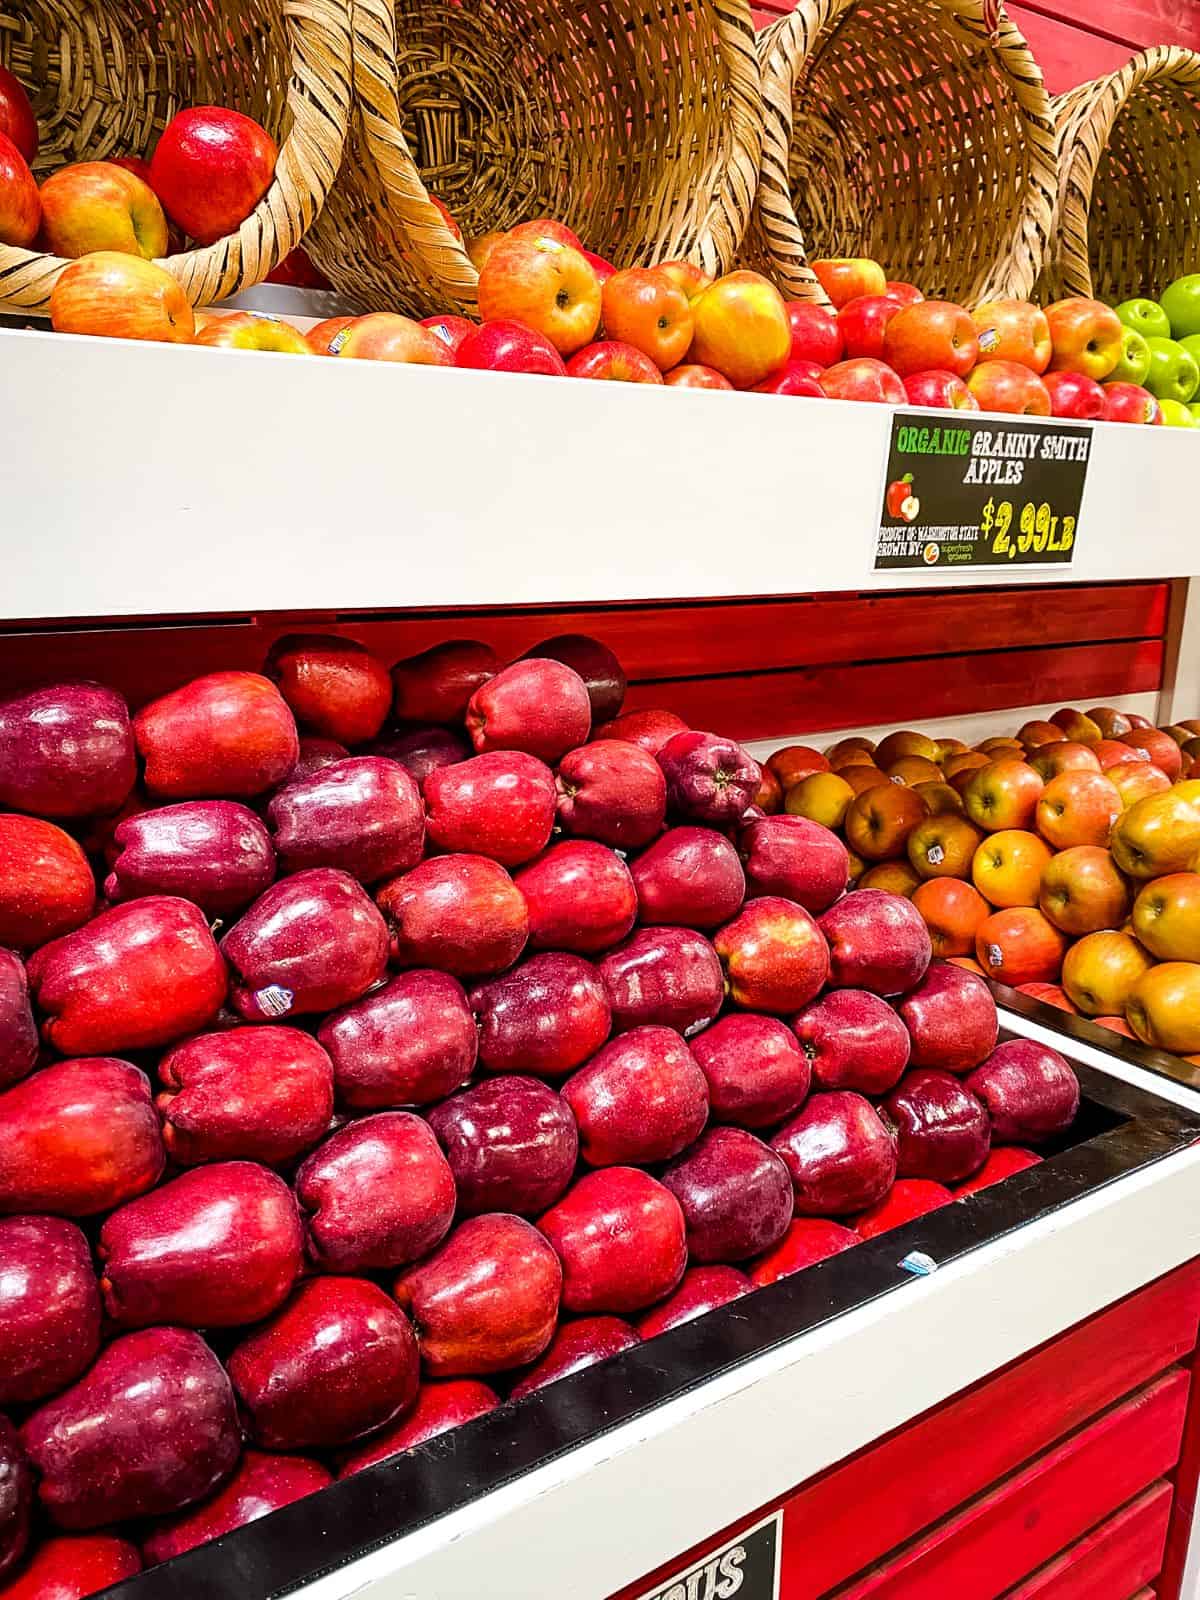 Apples on display in grocery store.